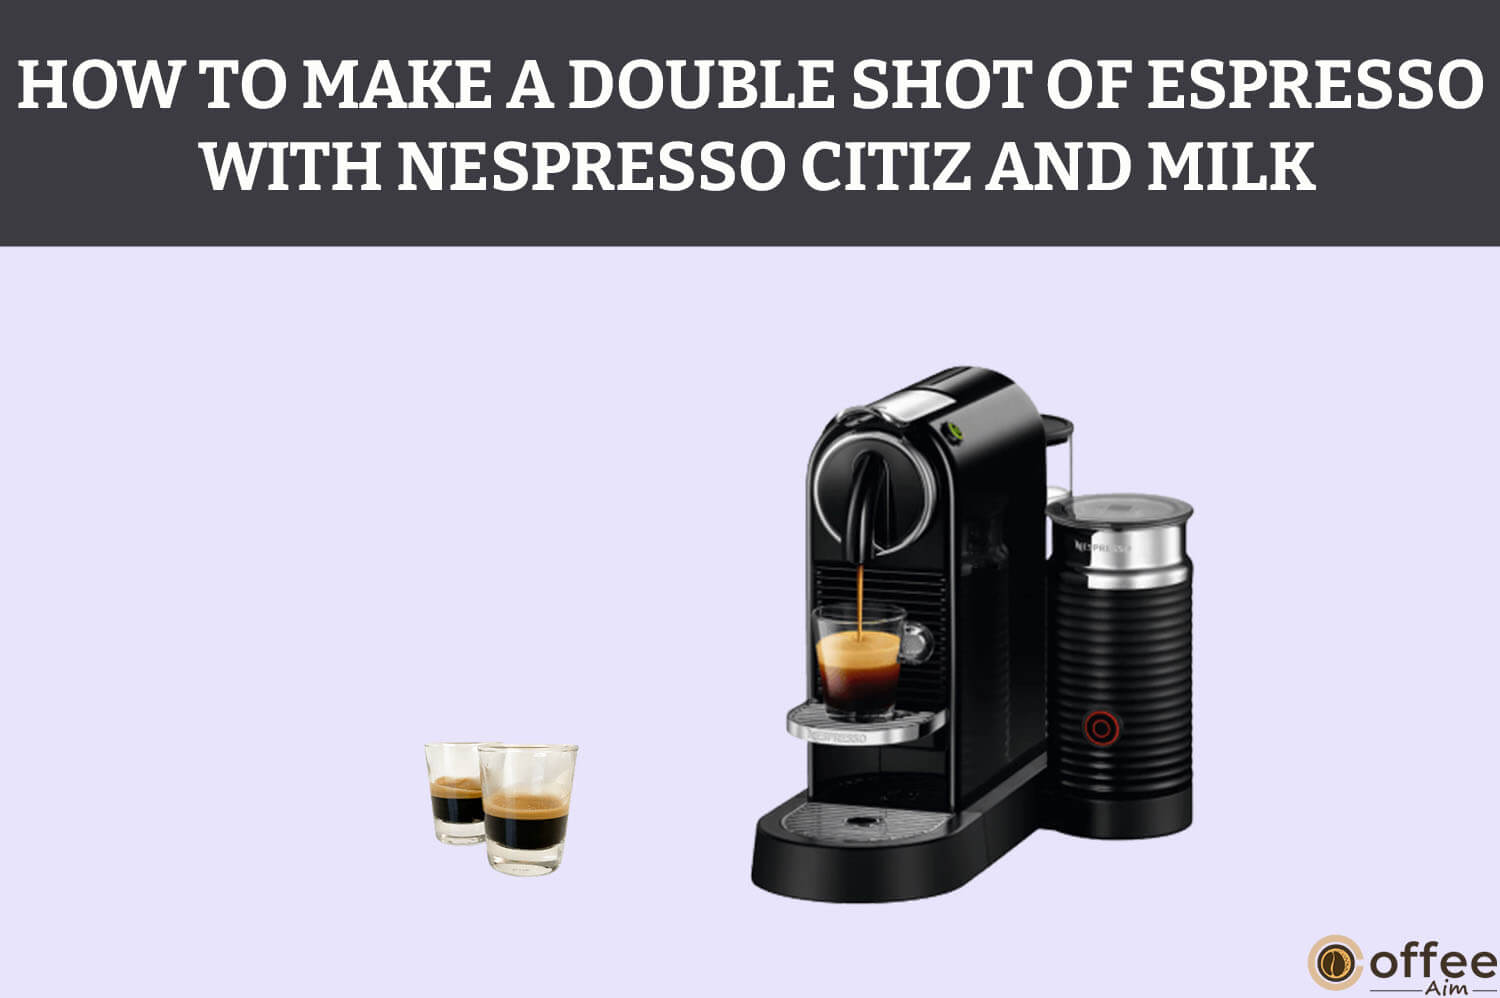 Featured image for the article "How To Make A Double Shot Of Espresso With Nespresso CitiZ And Milk"